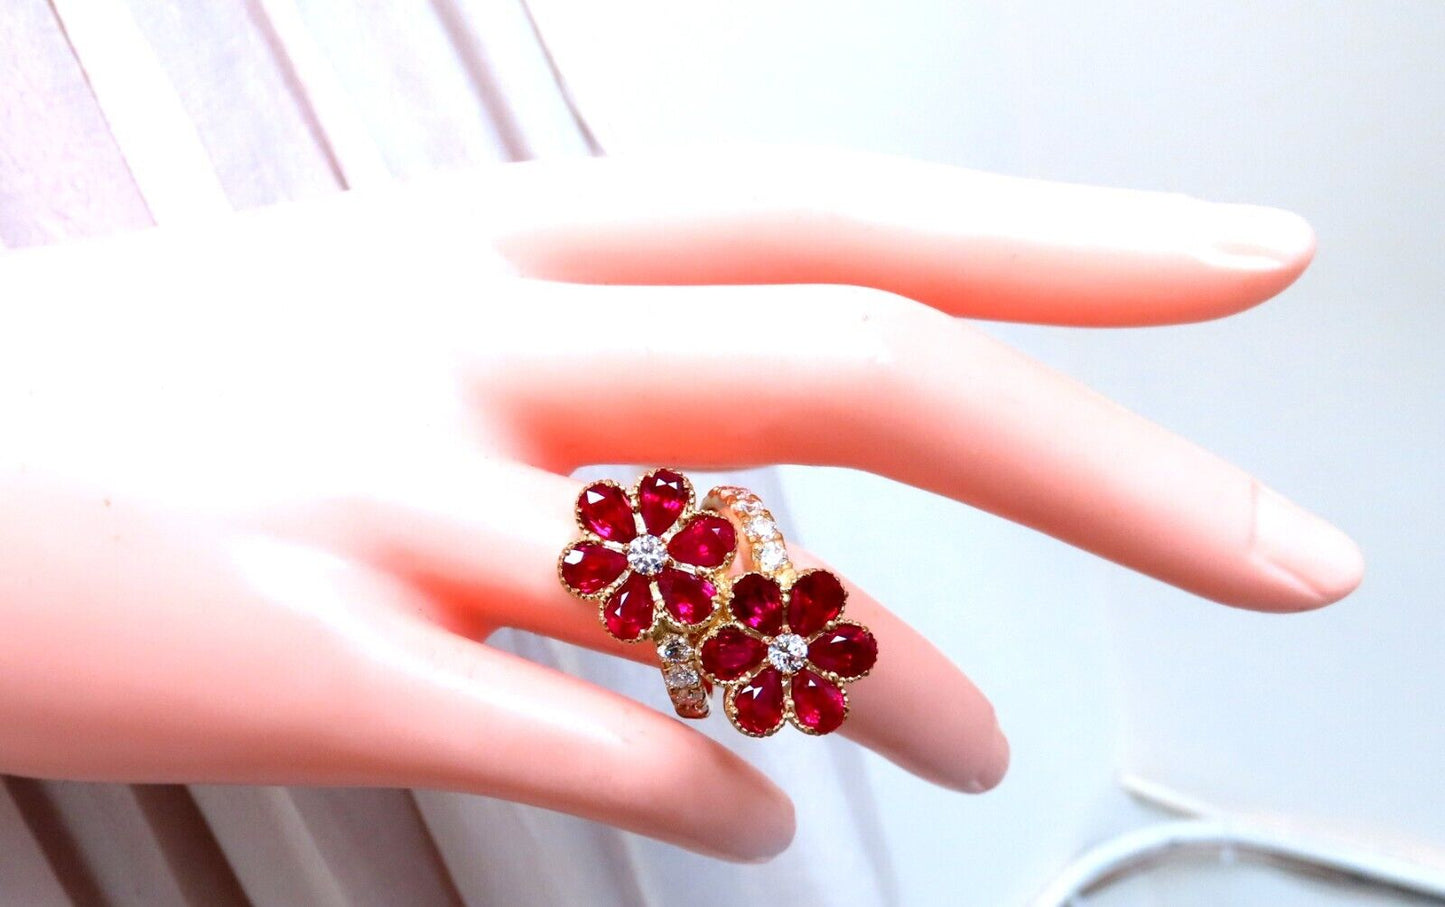 5.20ct Natural Ruby Diamonds Flower Cluster Ring 18kt yellow gold